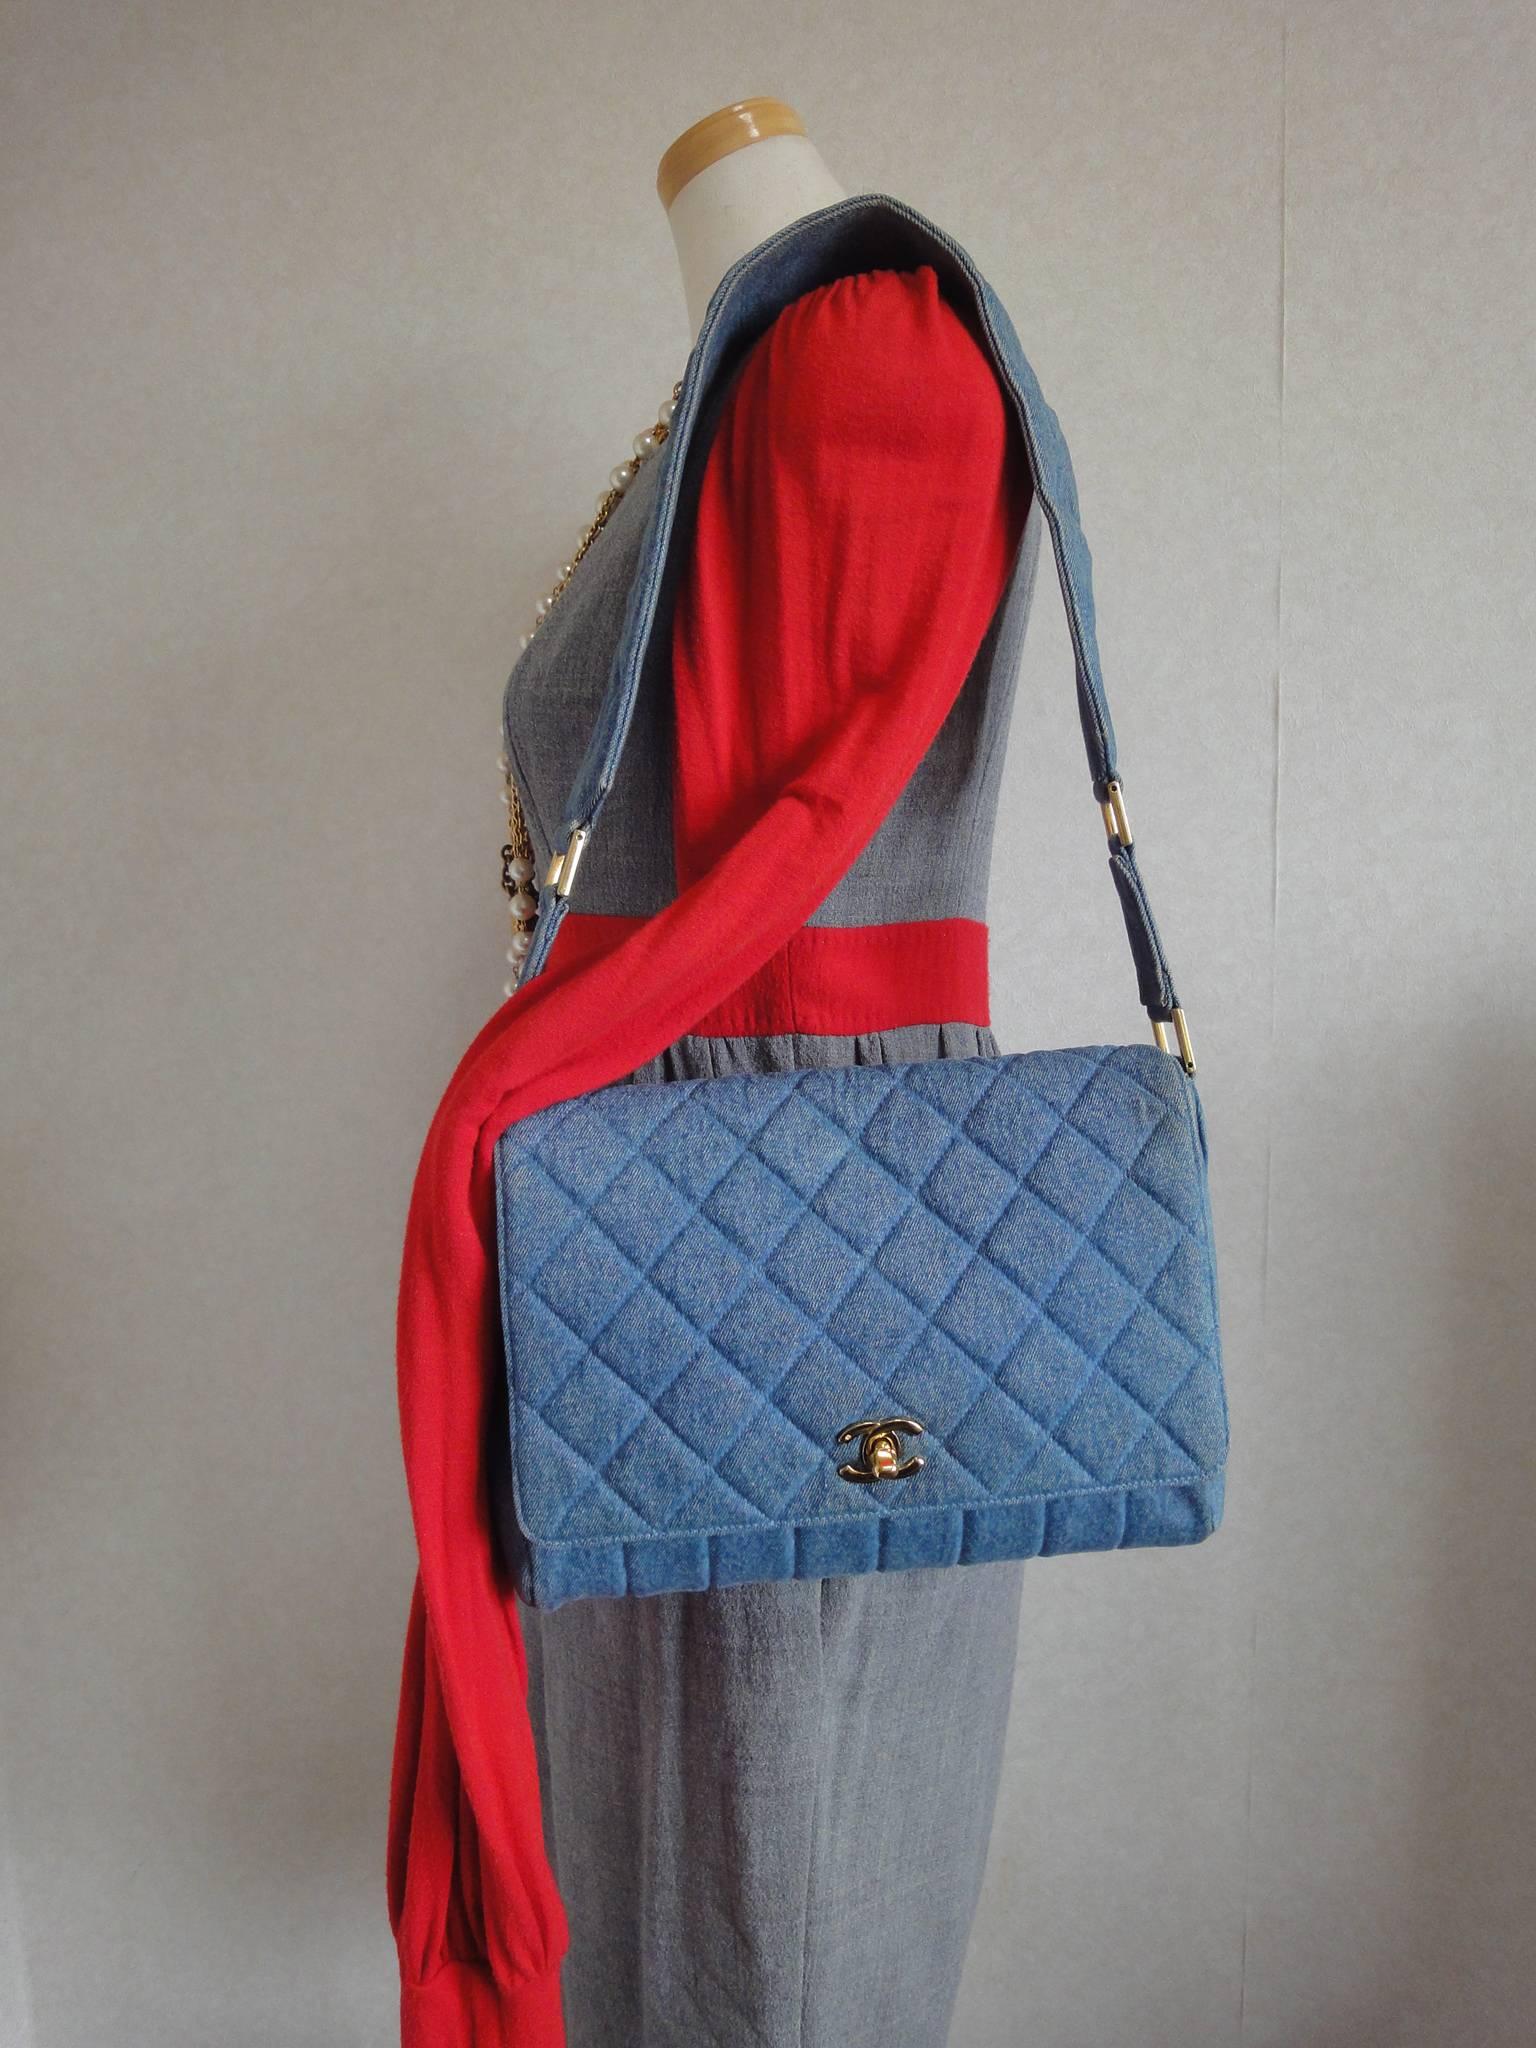 Vintage CHANEL denim bag with golden cc closure and vertical stitches.  4